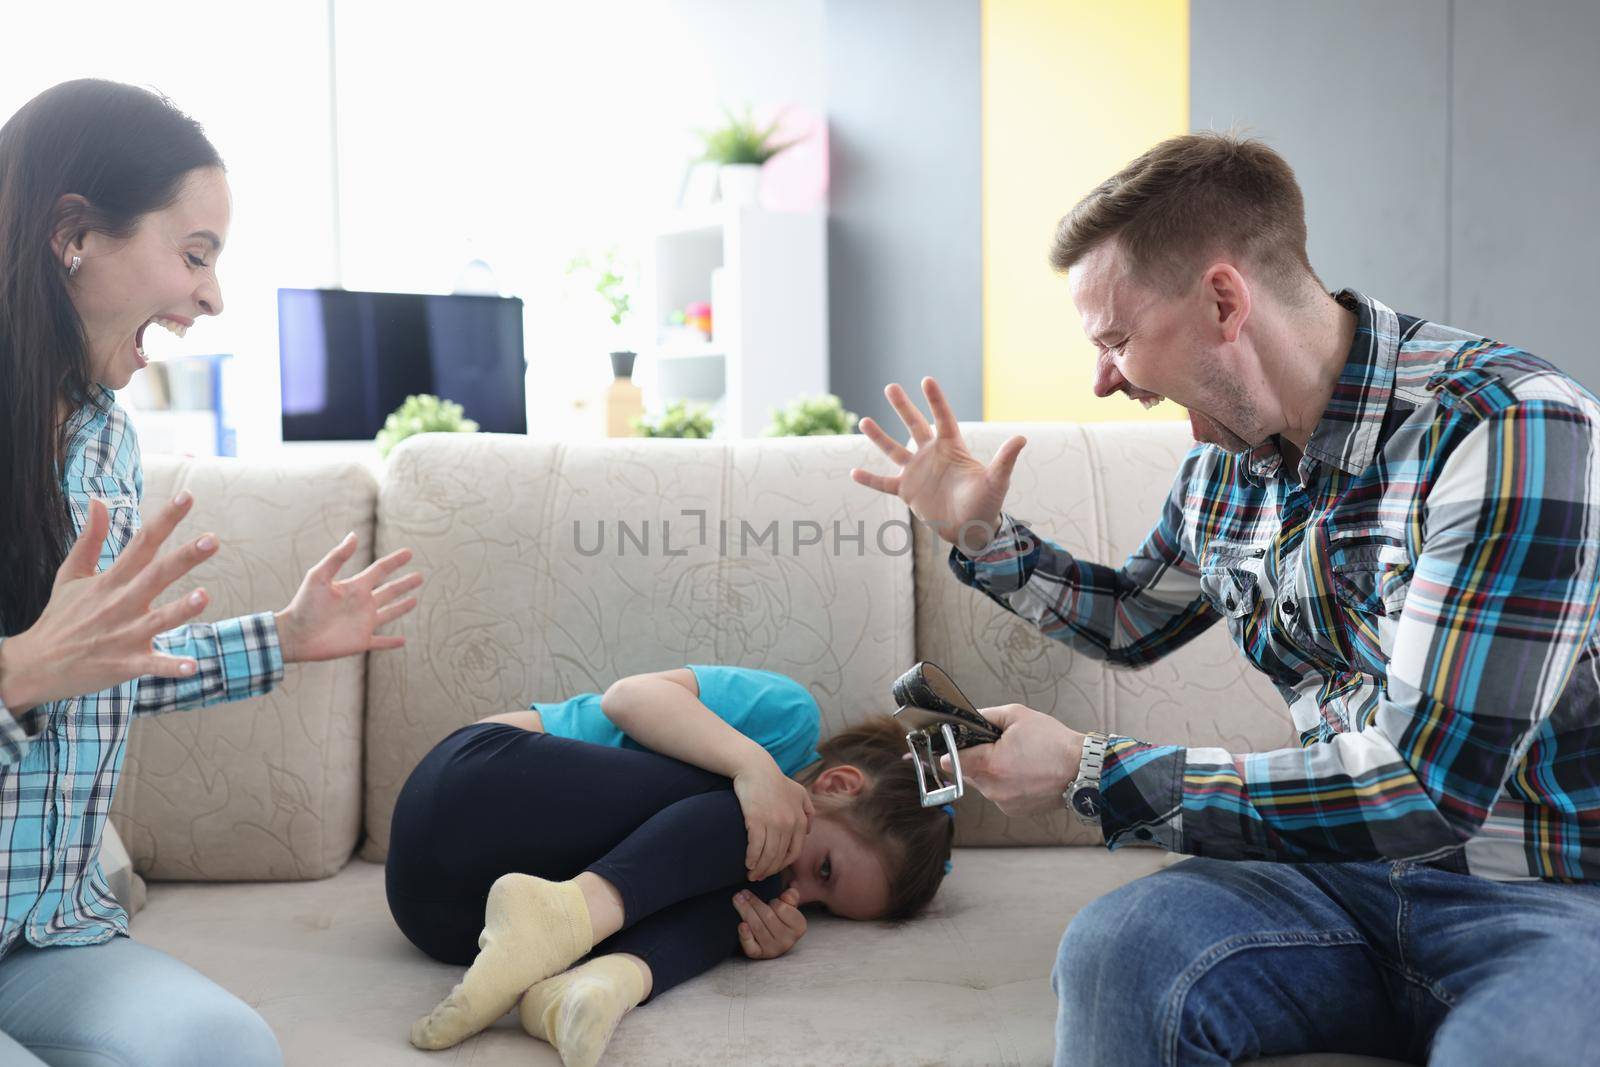 Dad and mom are shouting at their daughter at home, close-up. The child is afraid of punishment. Emotional domestic violence, aggressive parents